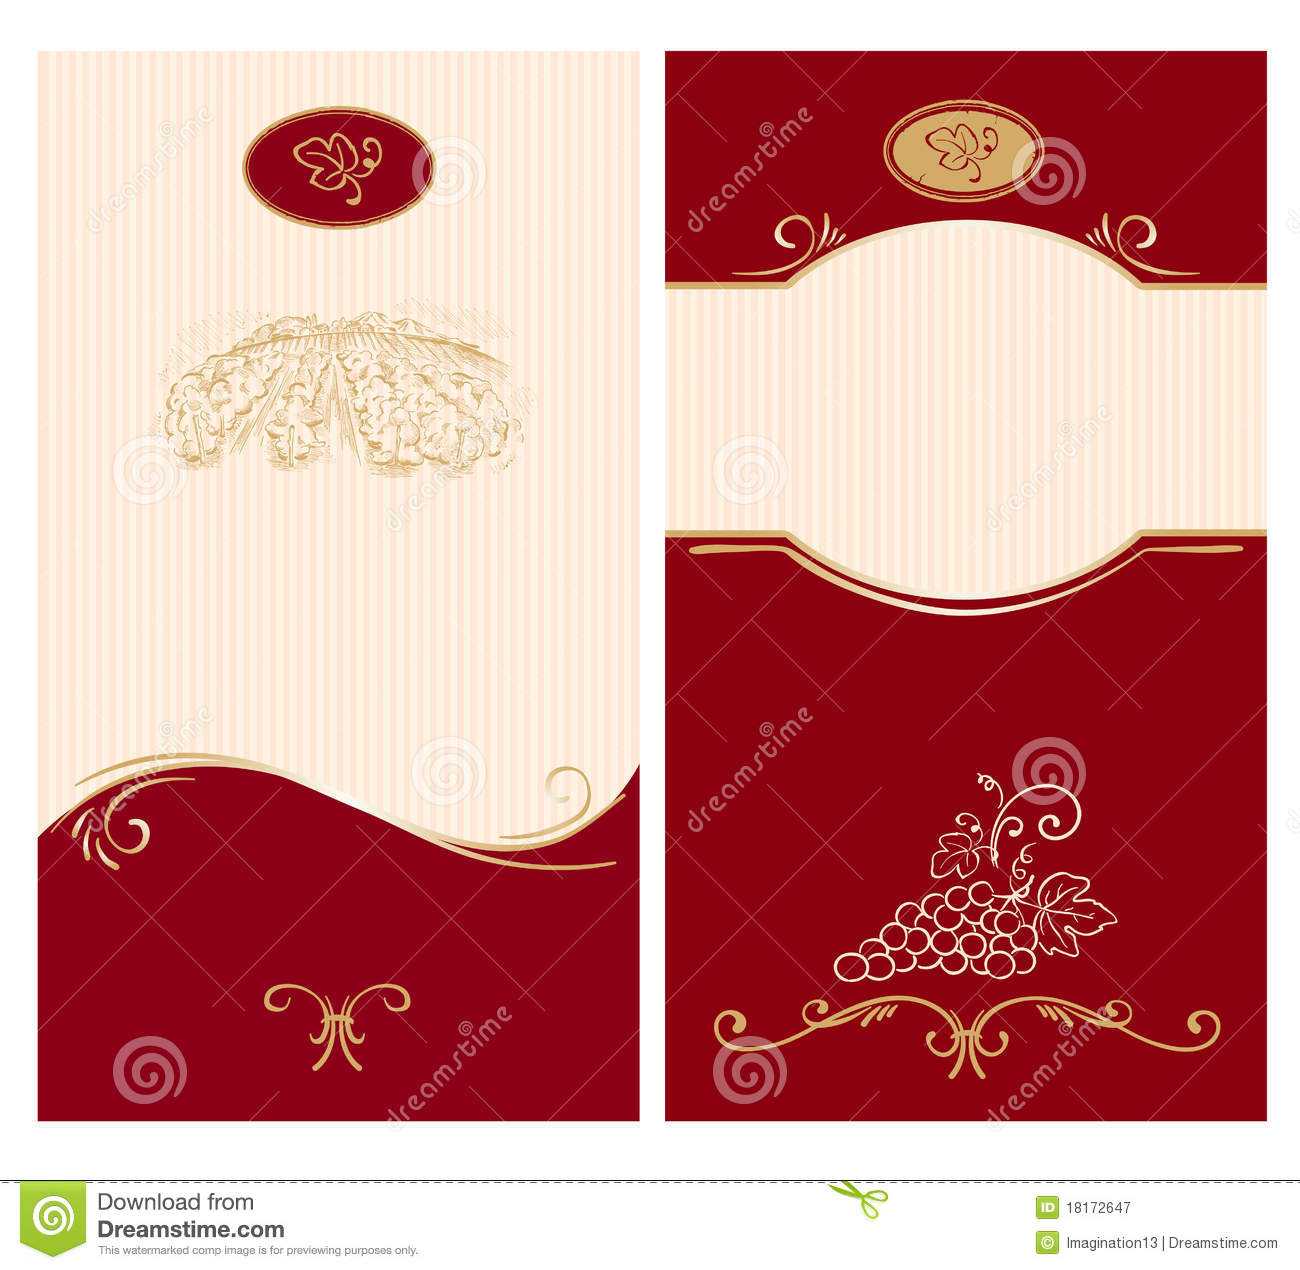 Template For Wine Labels Stock Vector. Illustration Of In Blank Wine Label Template